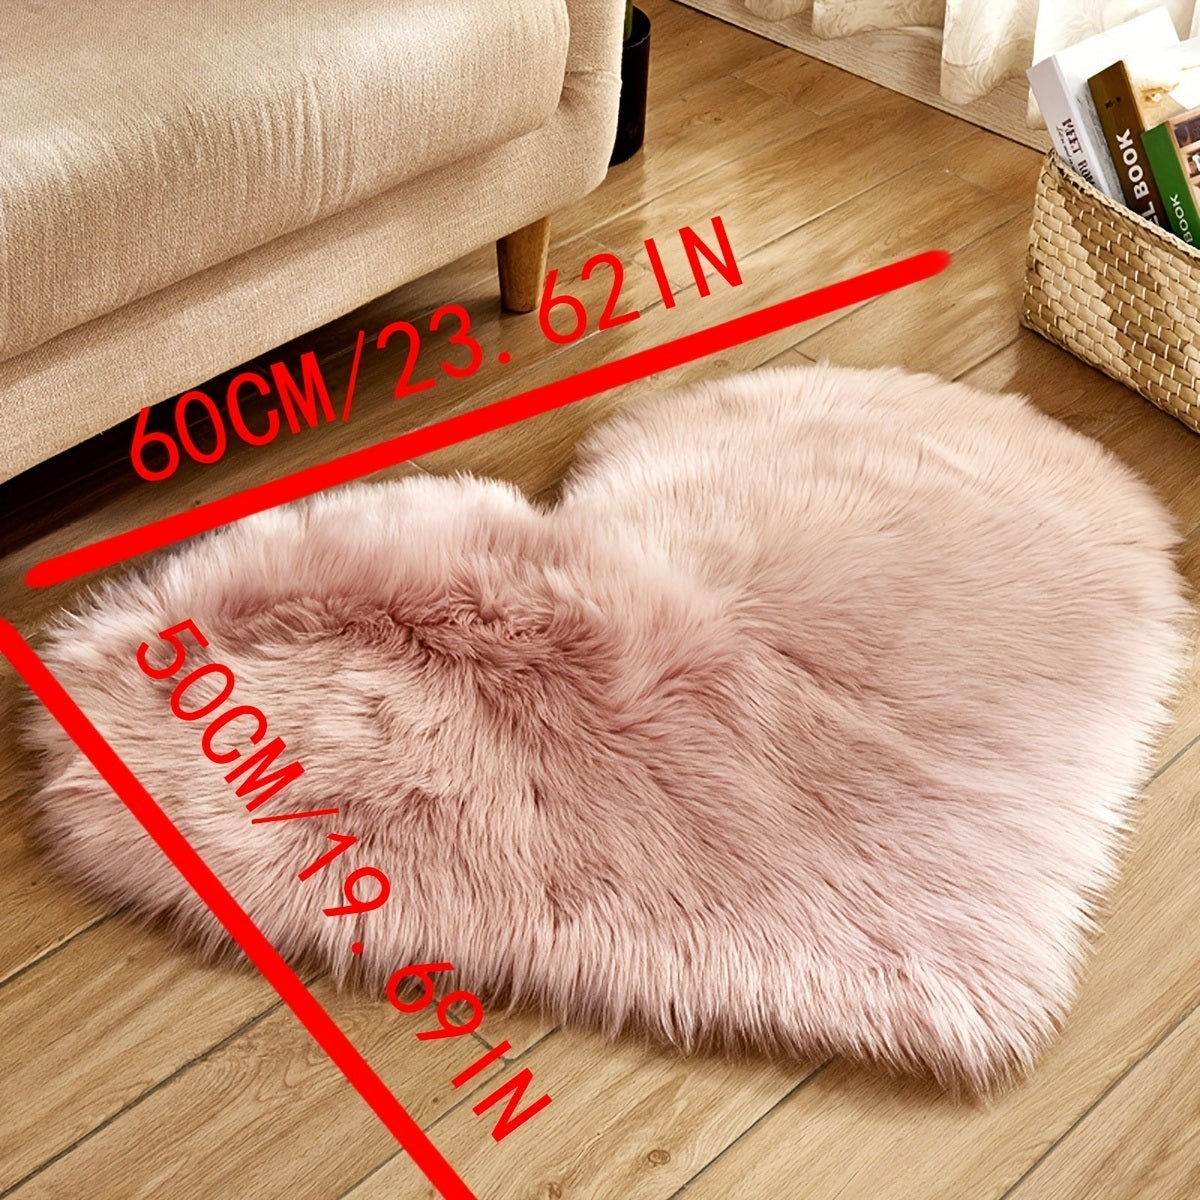 1pc Heart Shaped Area Rug, Plush Faux-Fur Carpet For Living Room & Bedroom, Home Decor Valentine's Day Decor 19.6in*23.6in/50cm*60cm